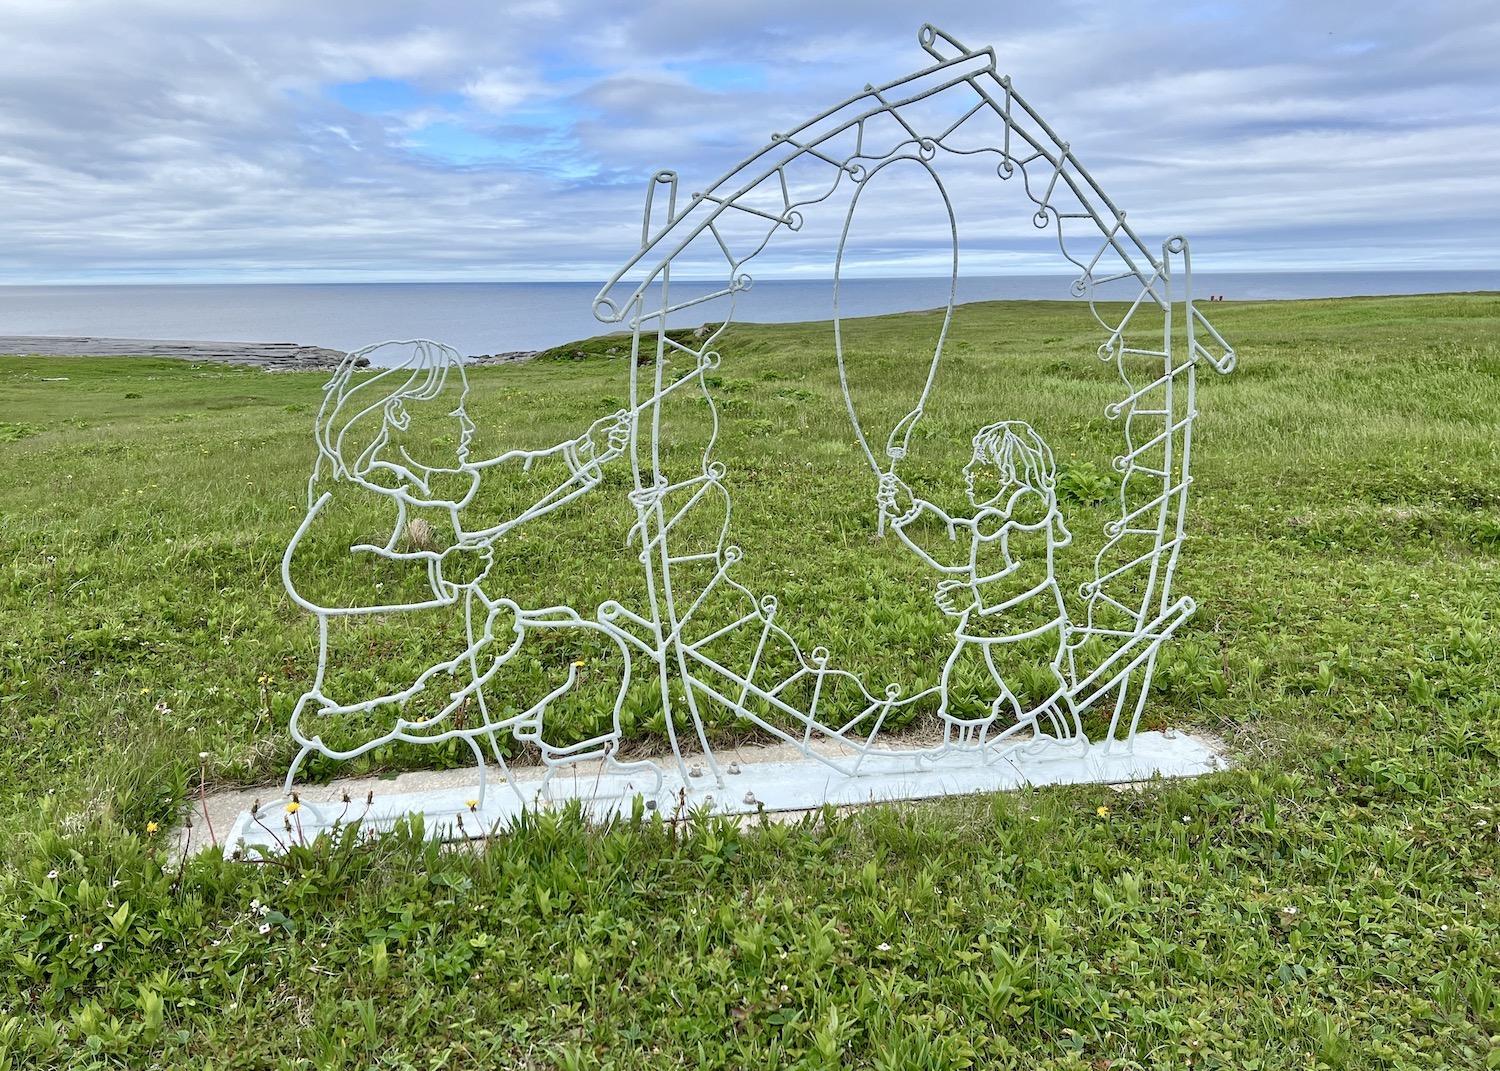 Near Point Riche Lighthouse at Port au Choix National Historic Site, this steel "Mother and Son" sculpture by Jim Maunder and Michael Massie commemorates Indigenous settlement in the area.